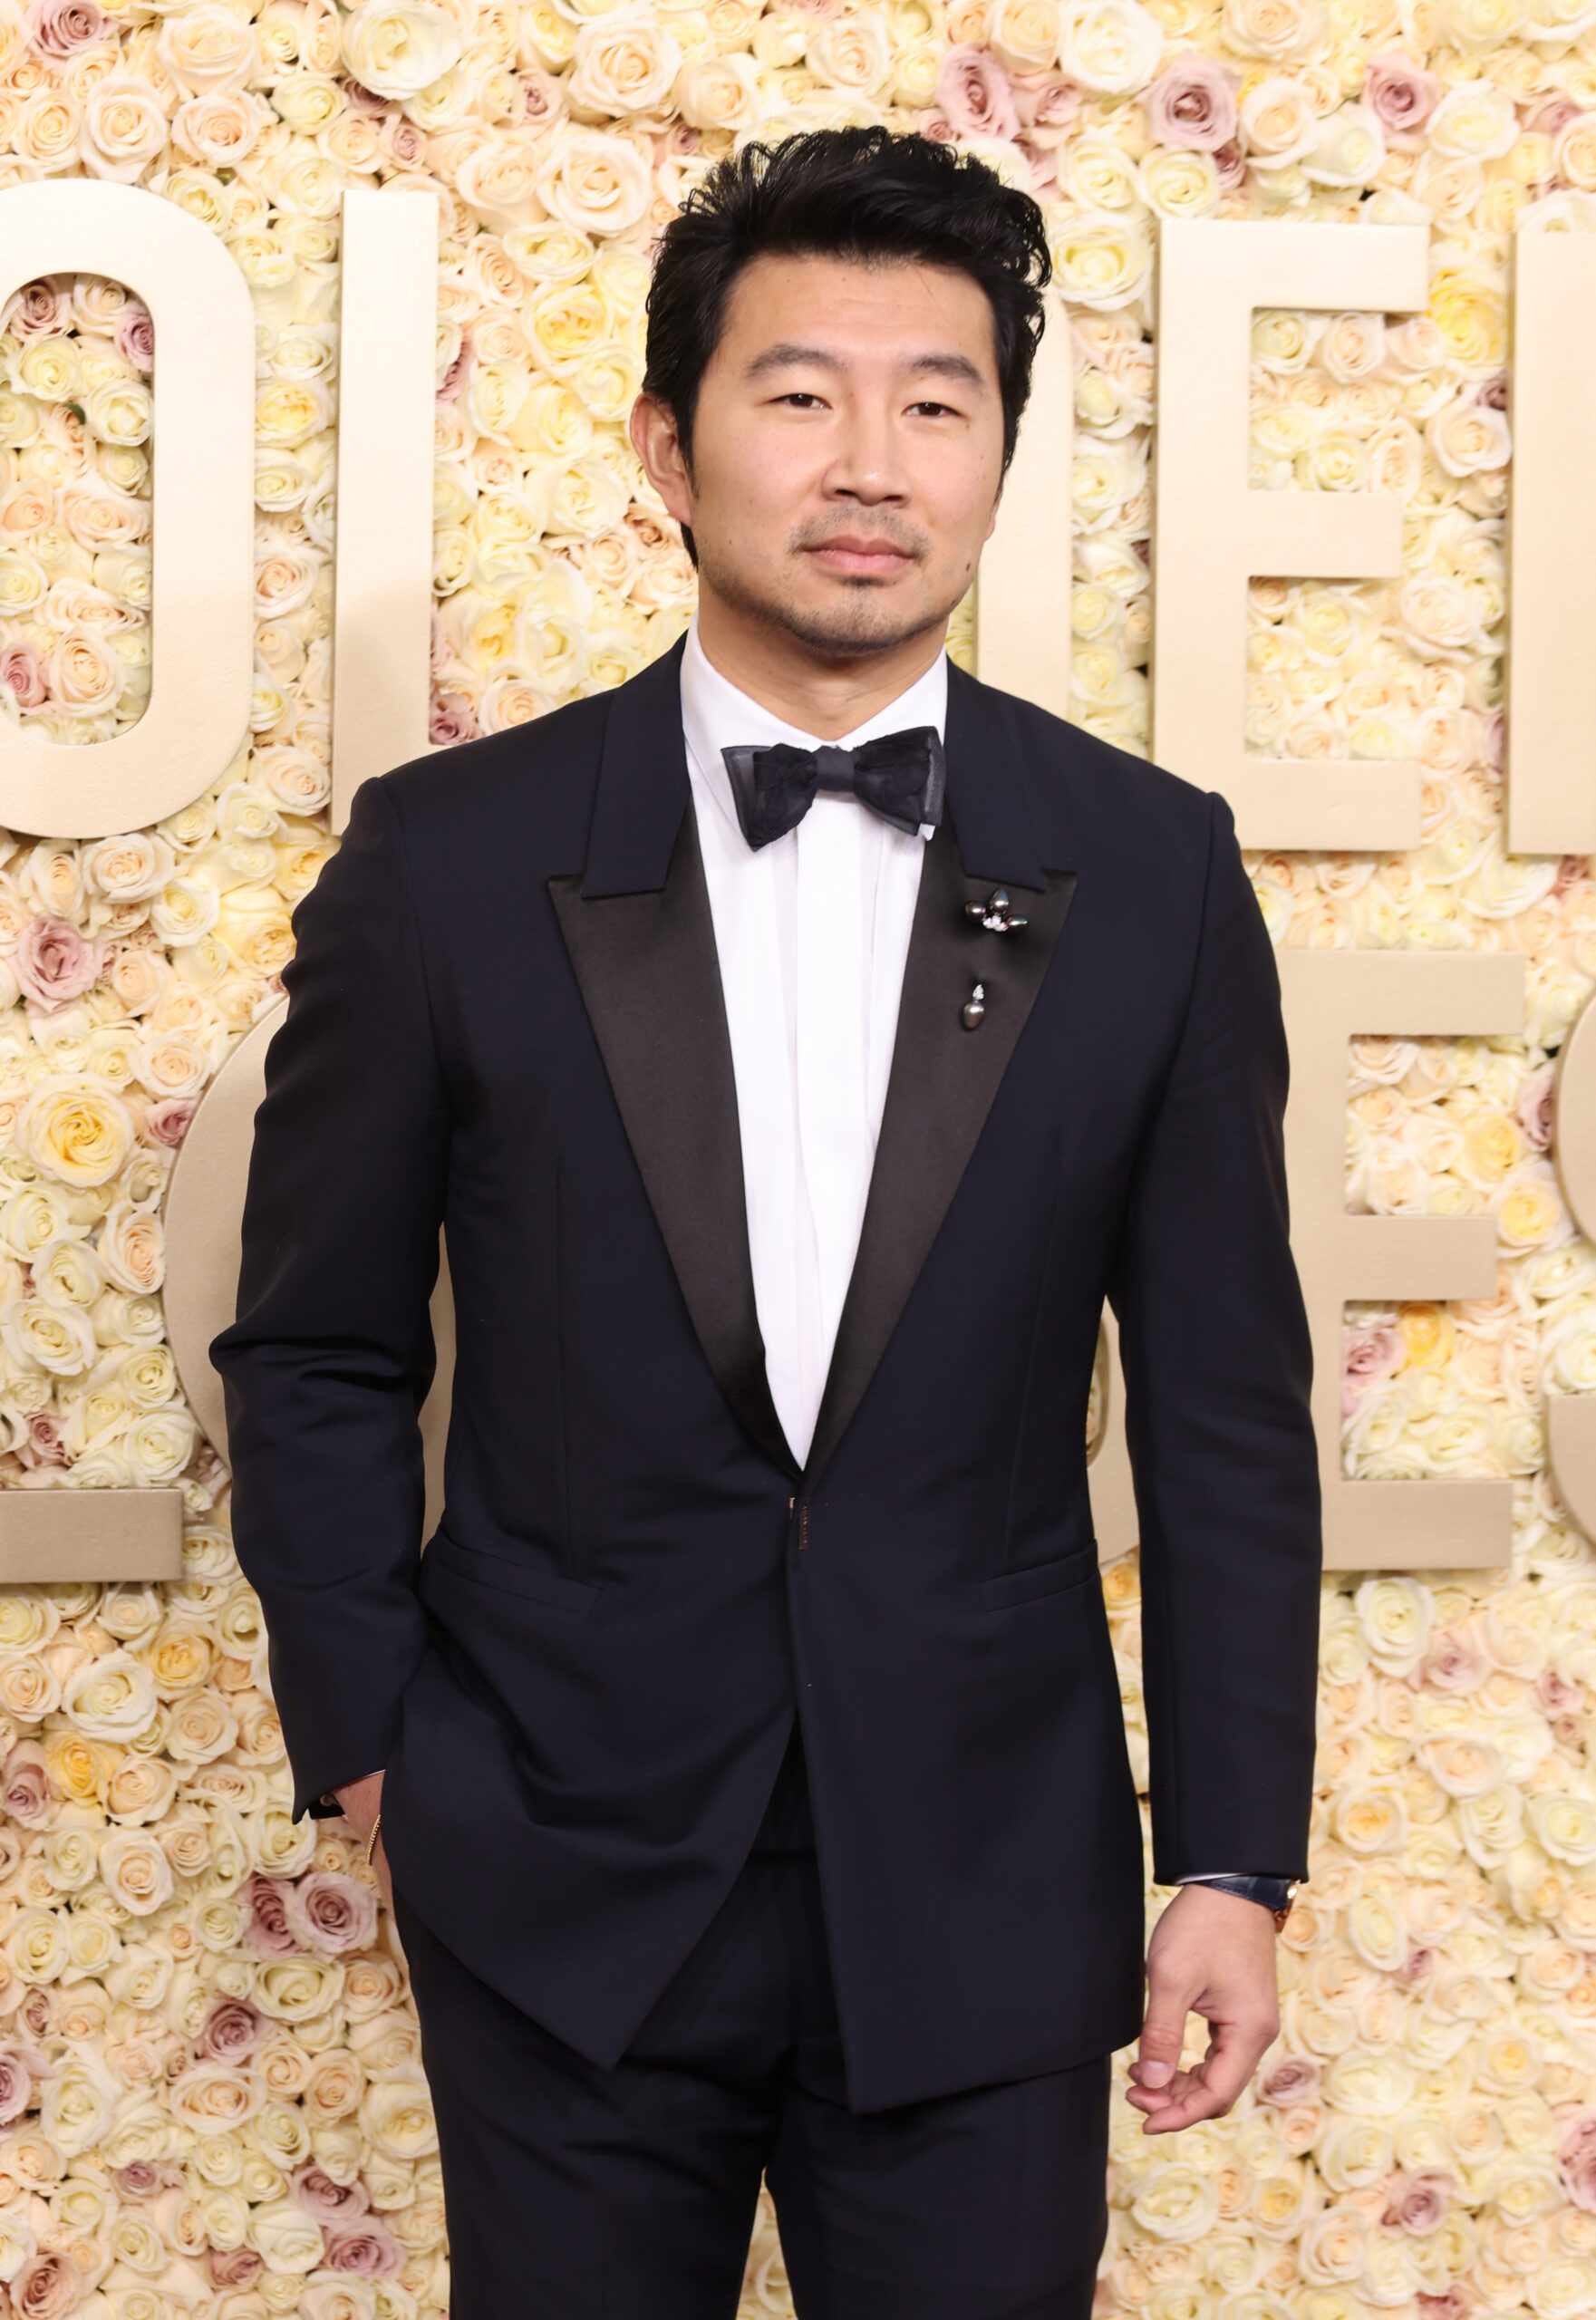 BEVERLY HILLS, CALIFORNIA - JANUARY 07: Simu Liu attends the 81st Annual Golden Globe Awards at The Beverly Hilton on January 07, 2024 in Beverly Hills, California. (Photo by Amy Sussman/Getty Images)